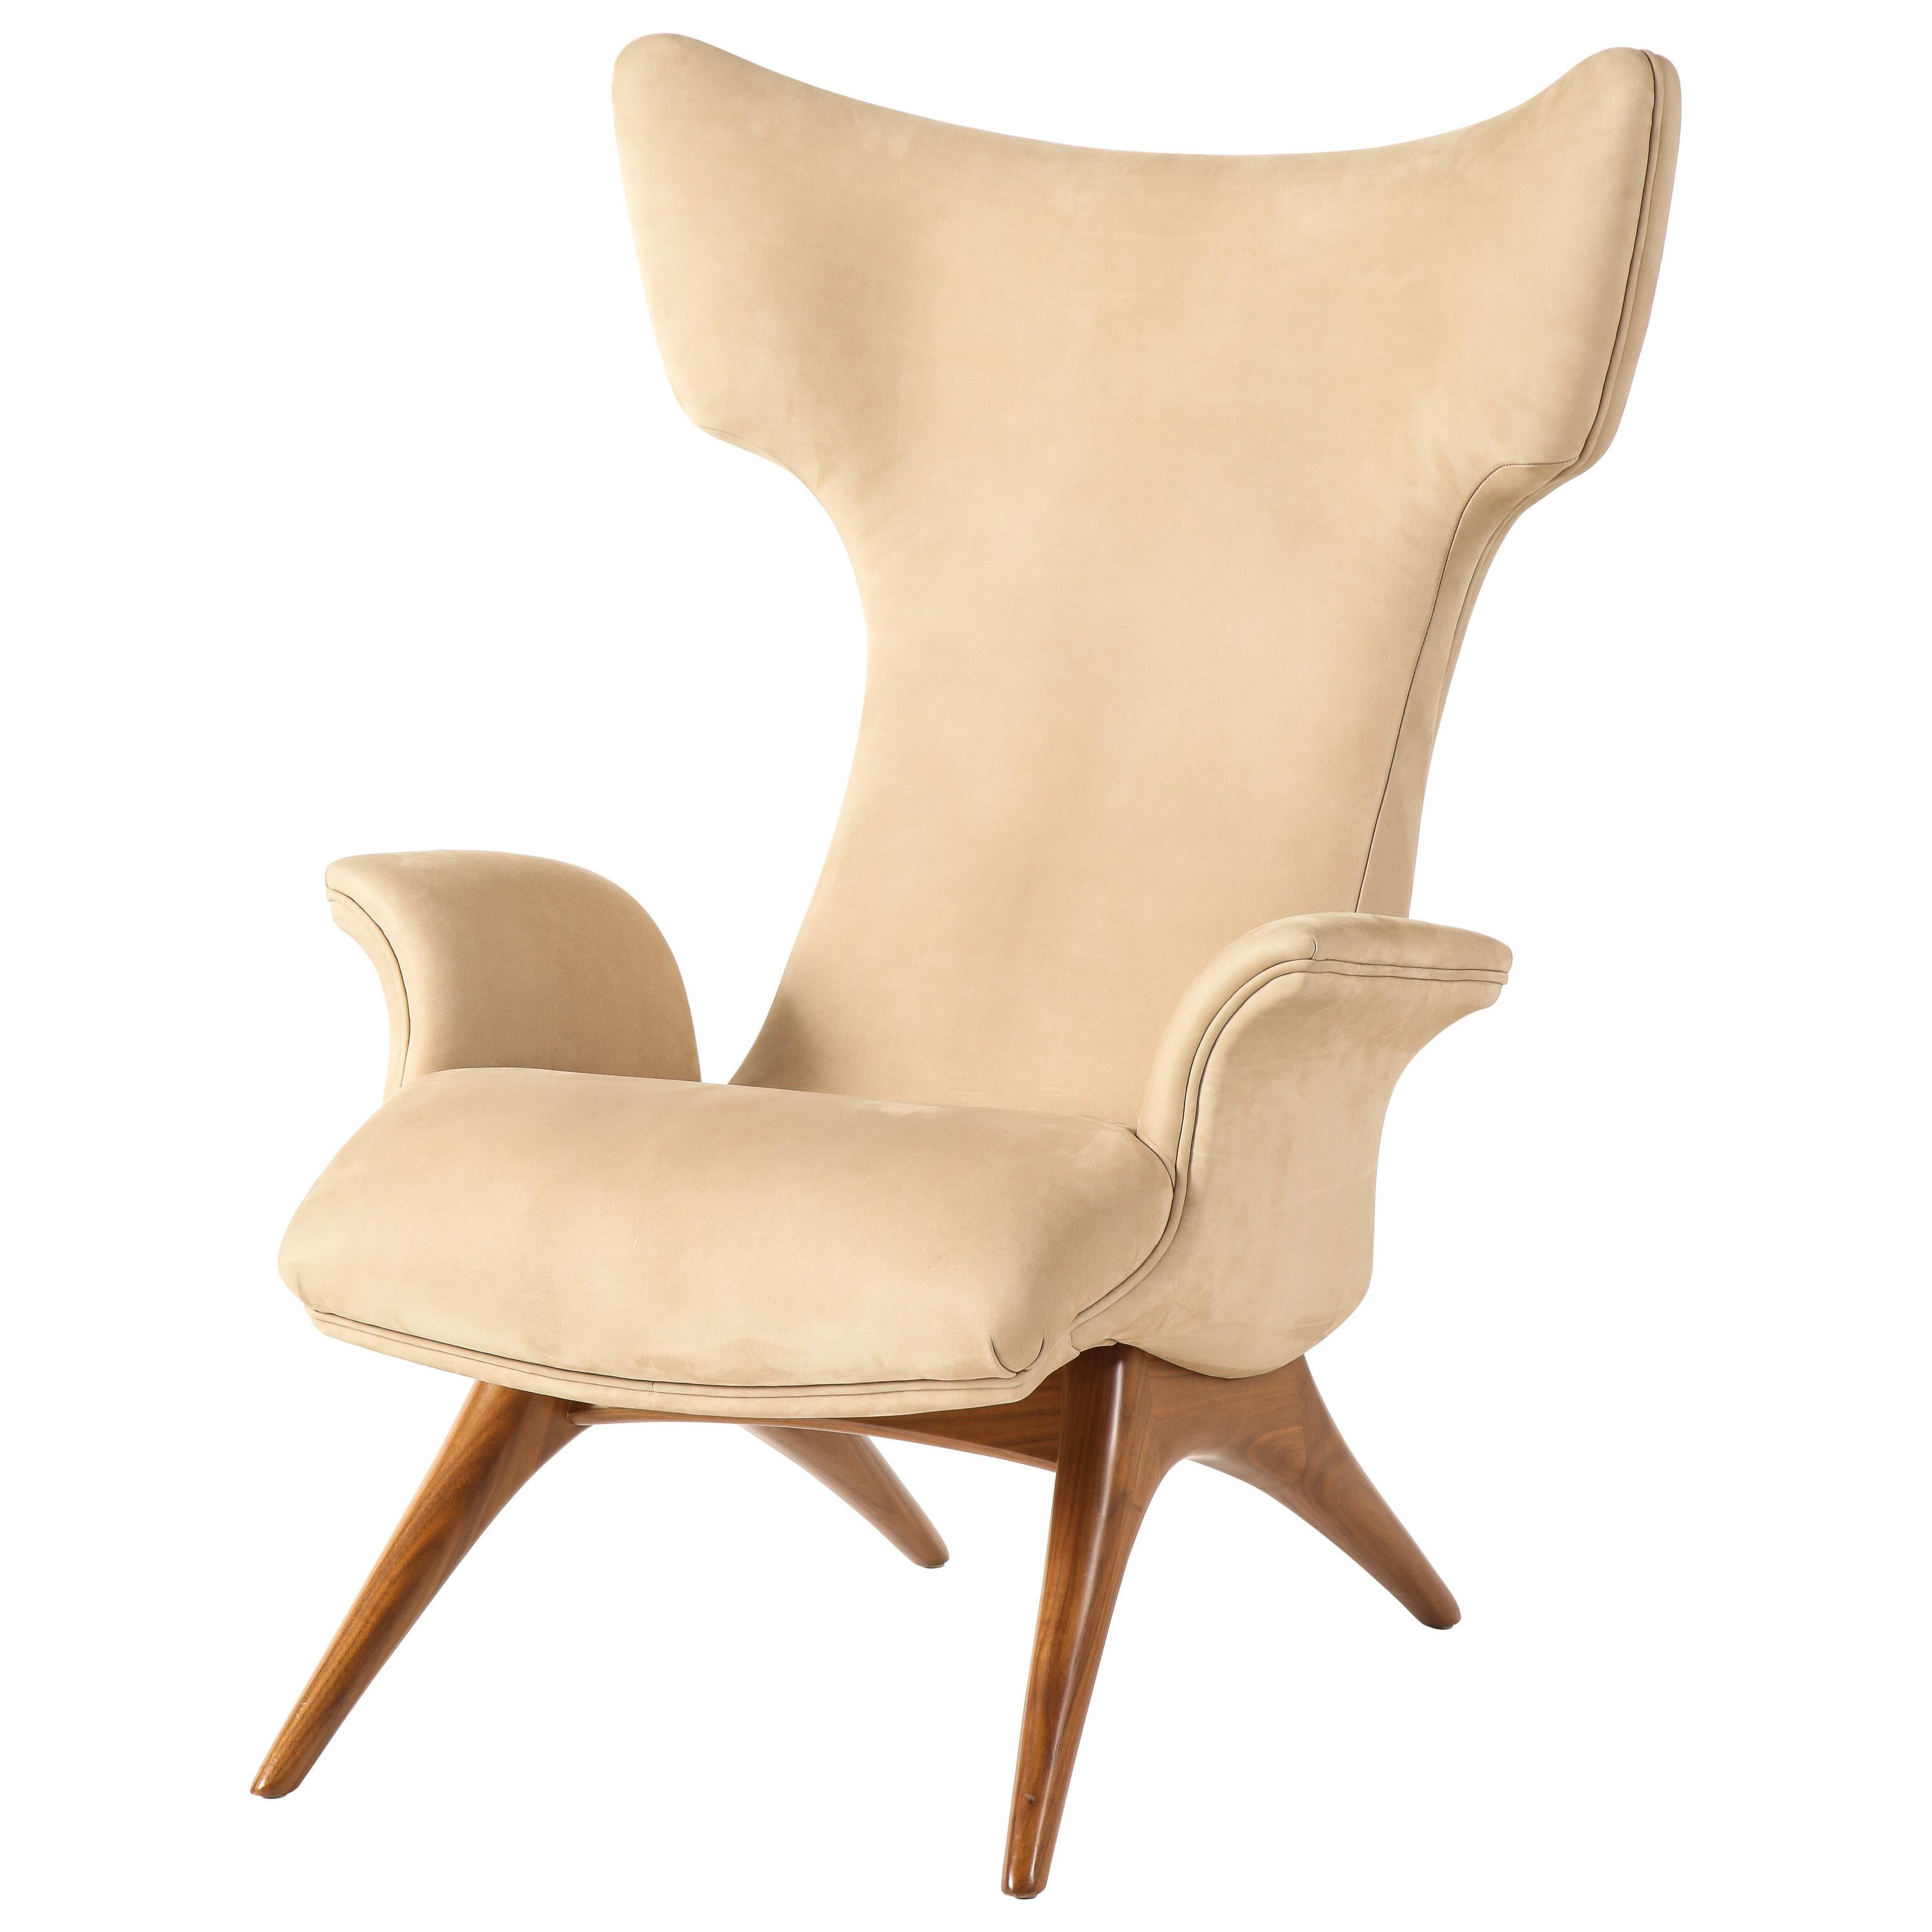 Vladimir Kagan Ondine Chair with Sueded Leather Upholstery & Natural Walnut Base